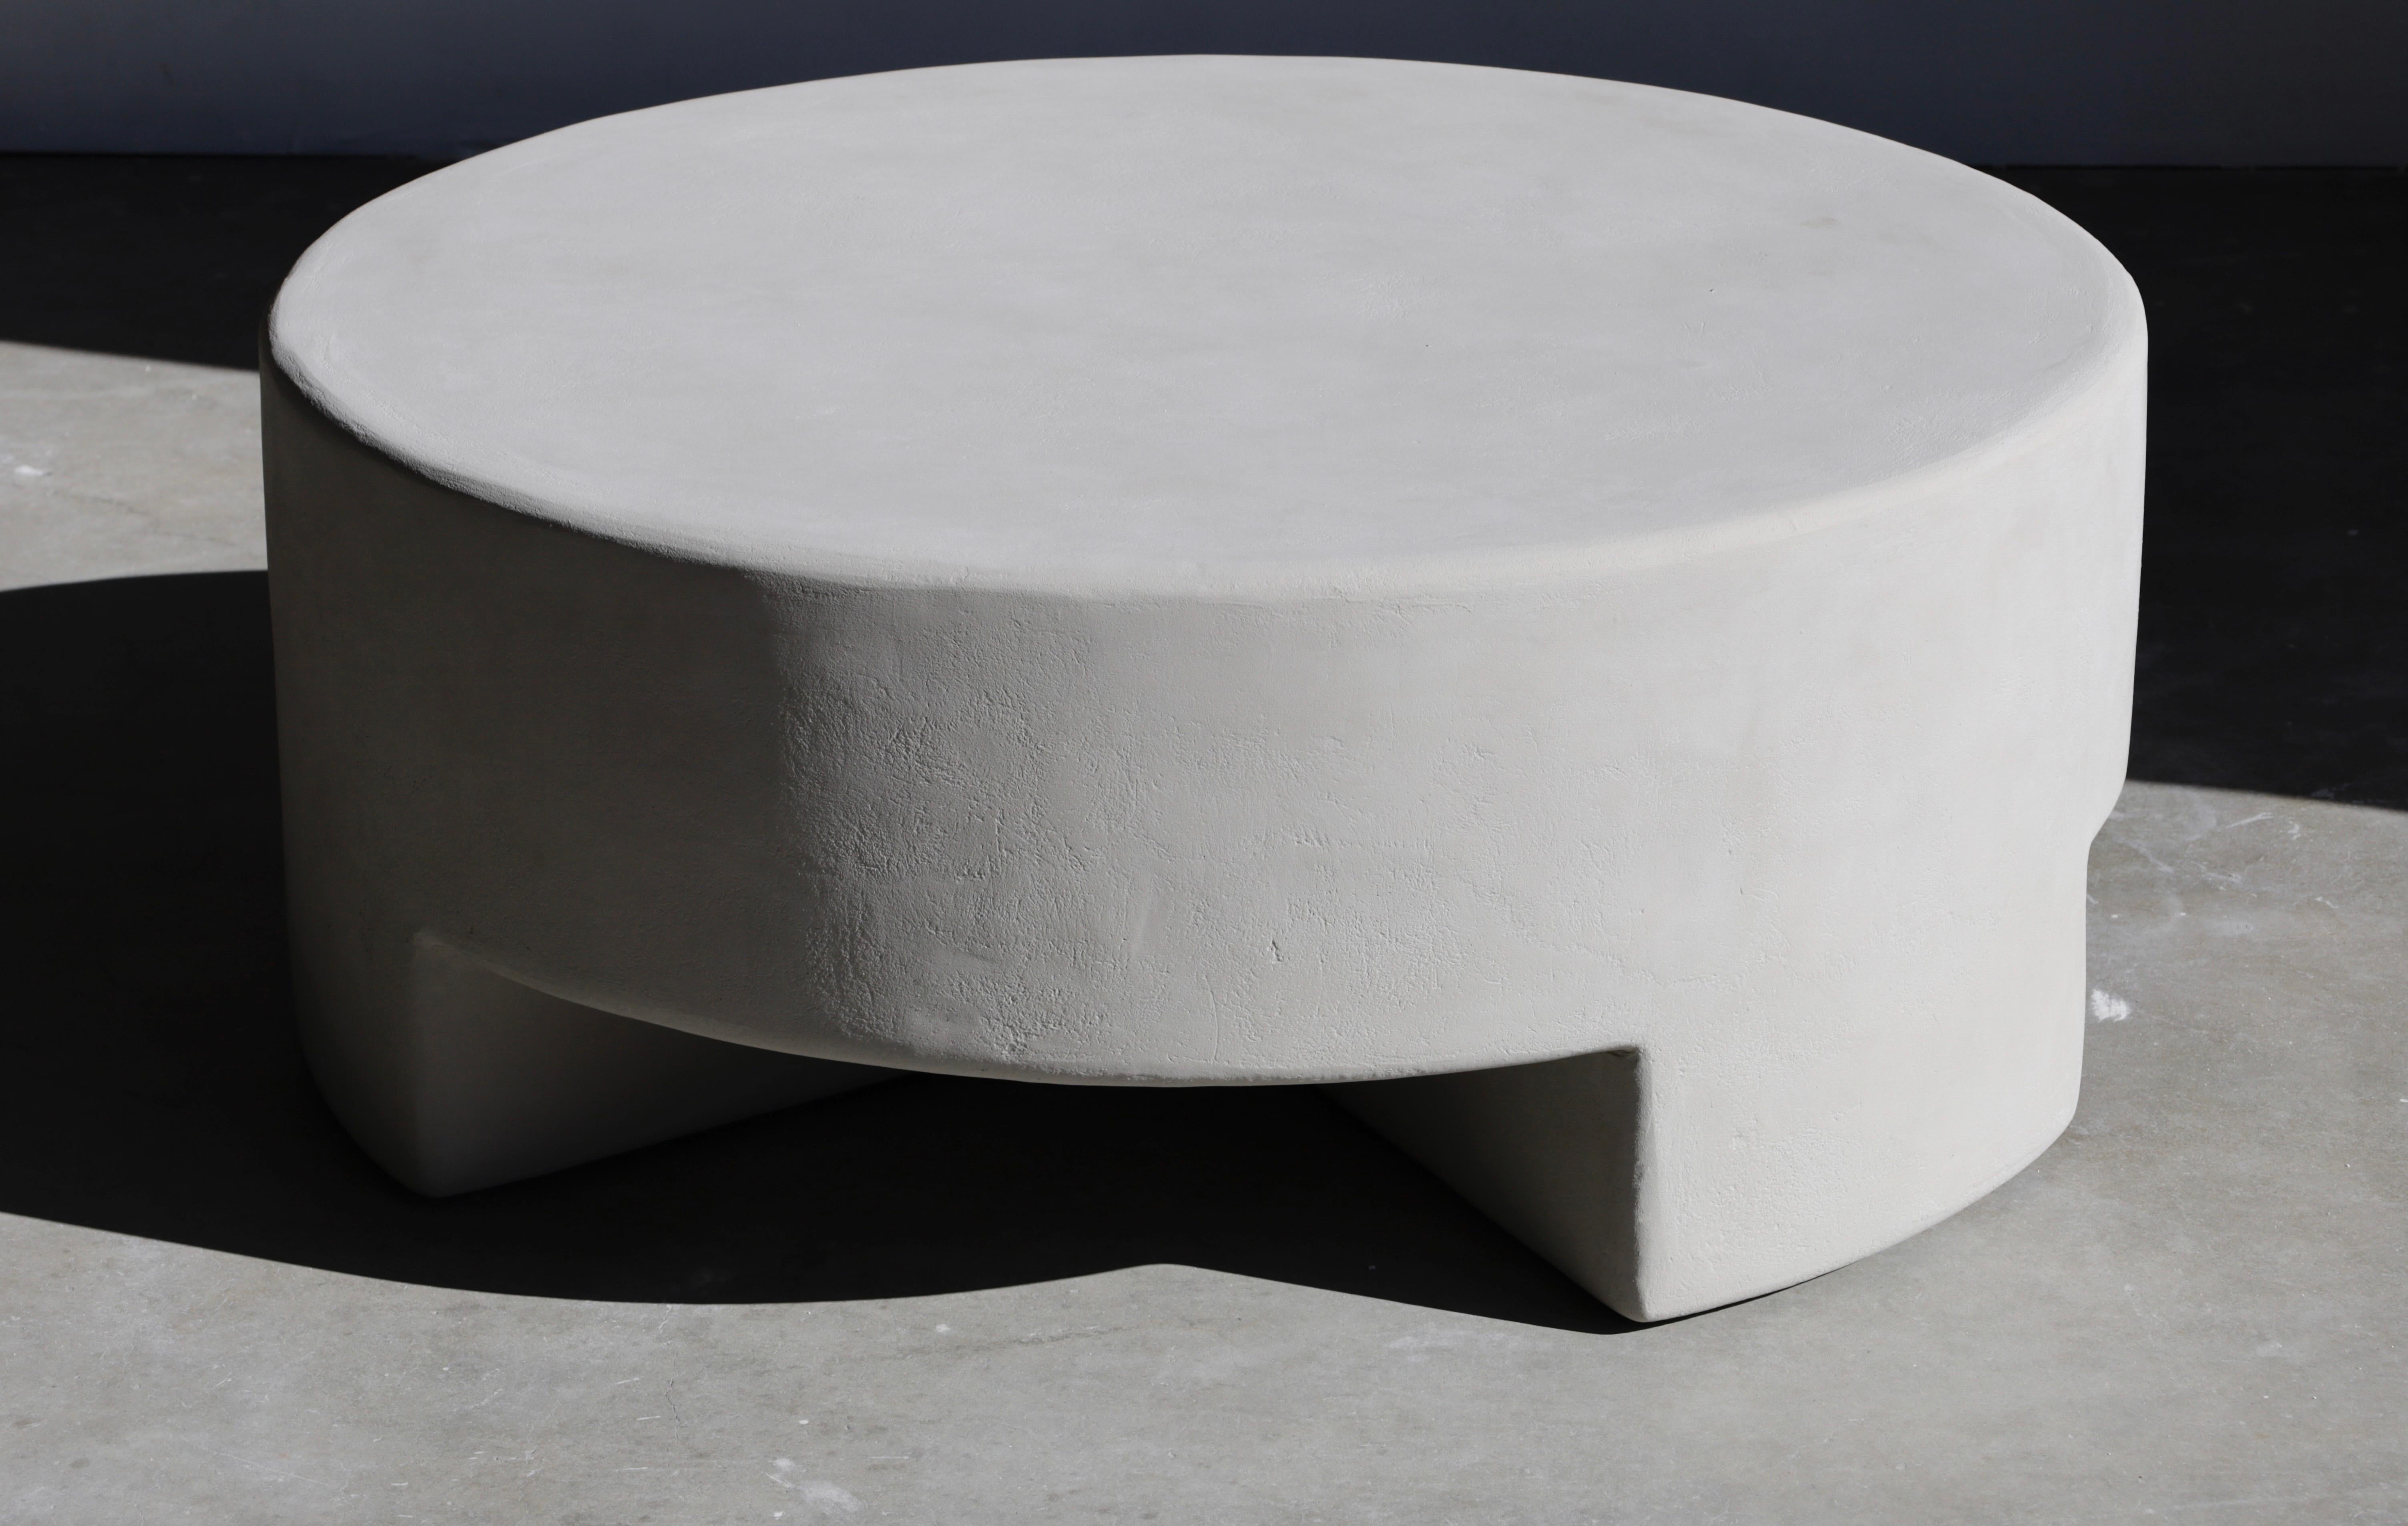 American reed round plaster coffee table in hydra by öken house studios For Sale